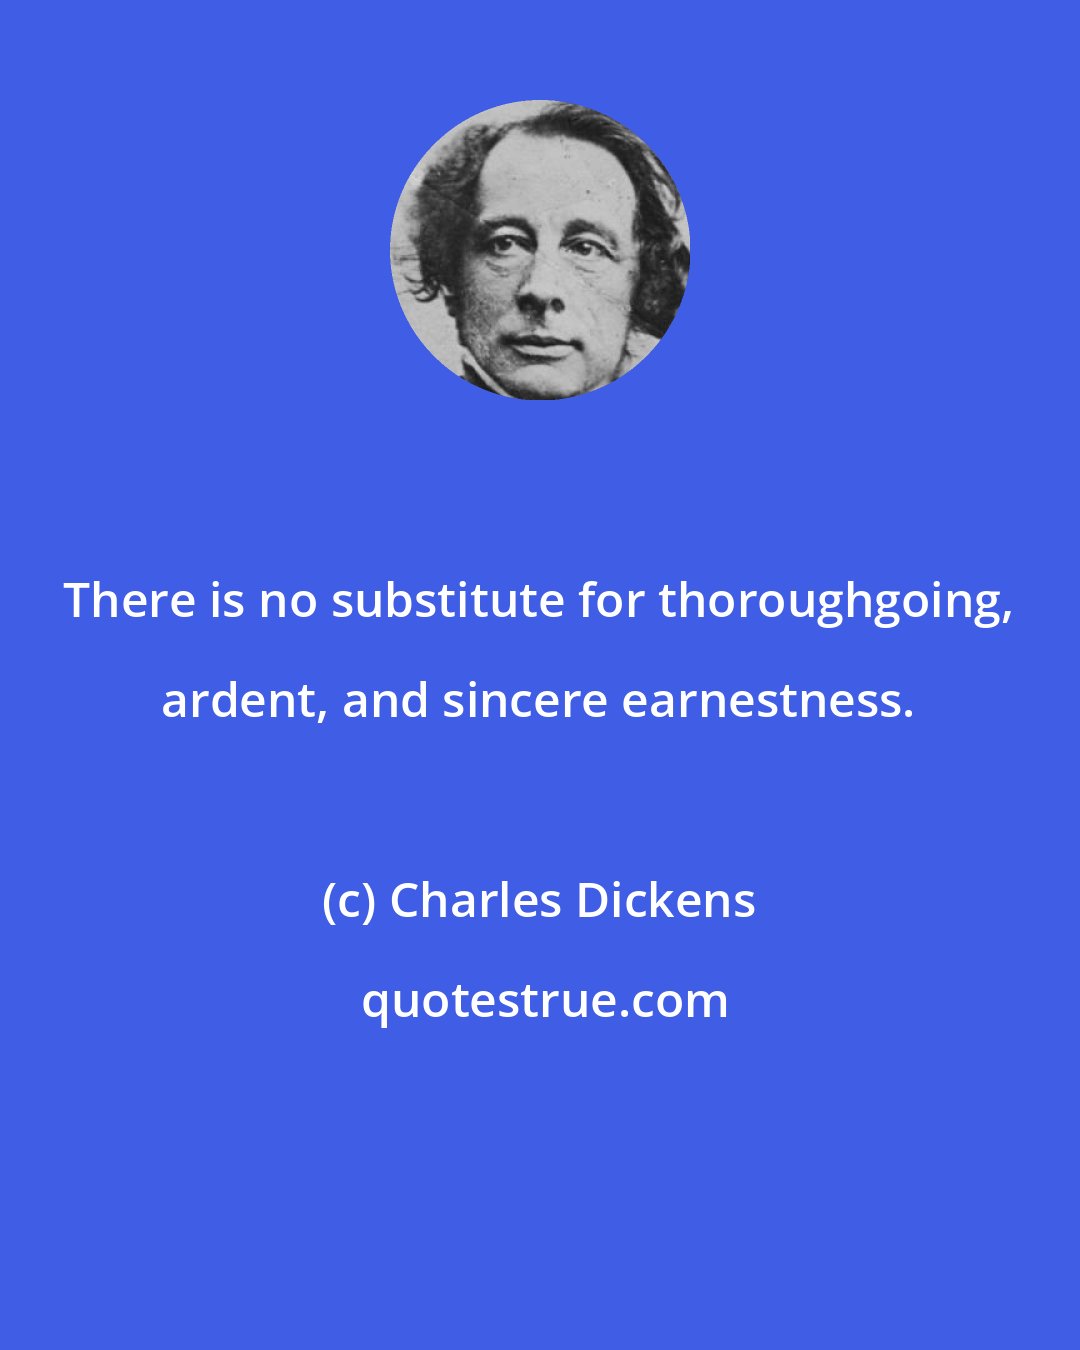 Charles Dickens: There is no substitute for thoroughgoing, ardent, and sincere earnestness.